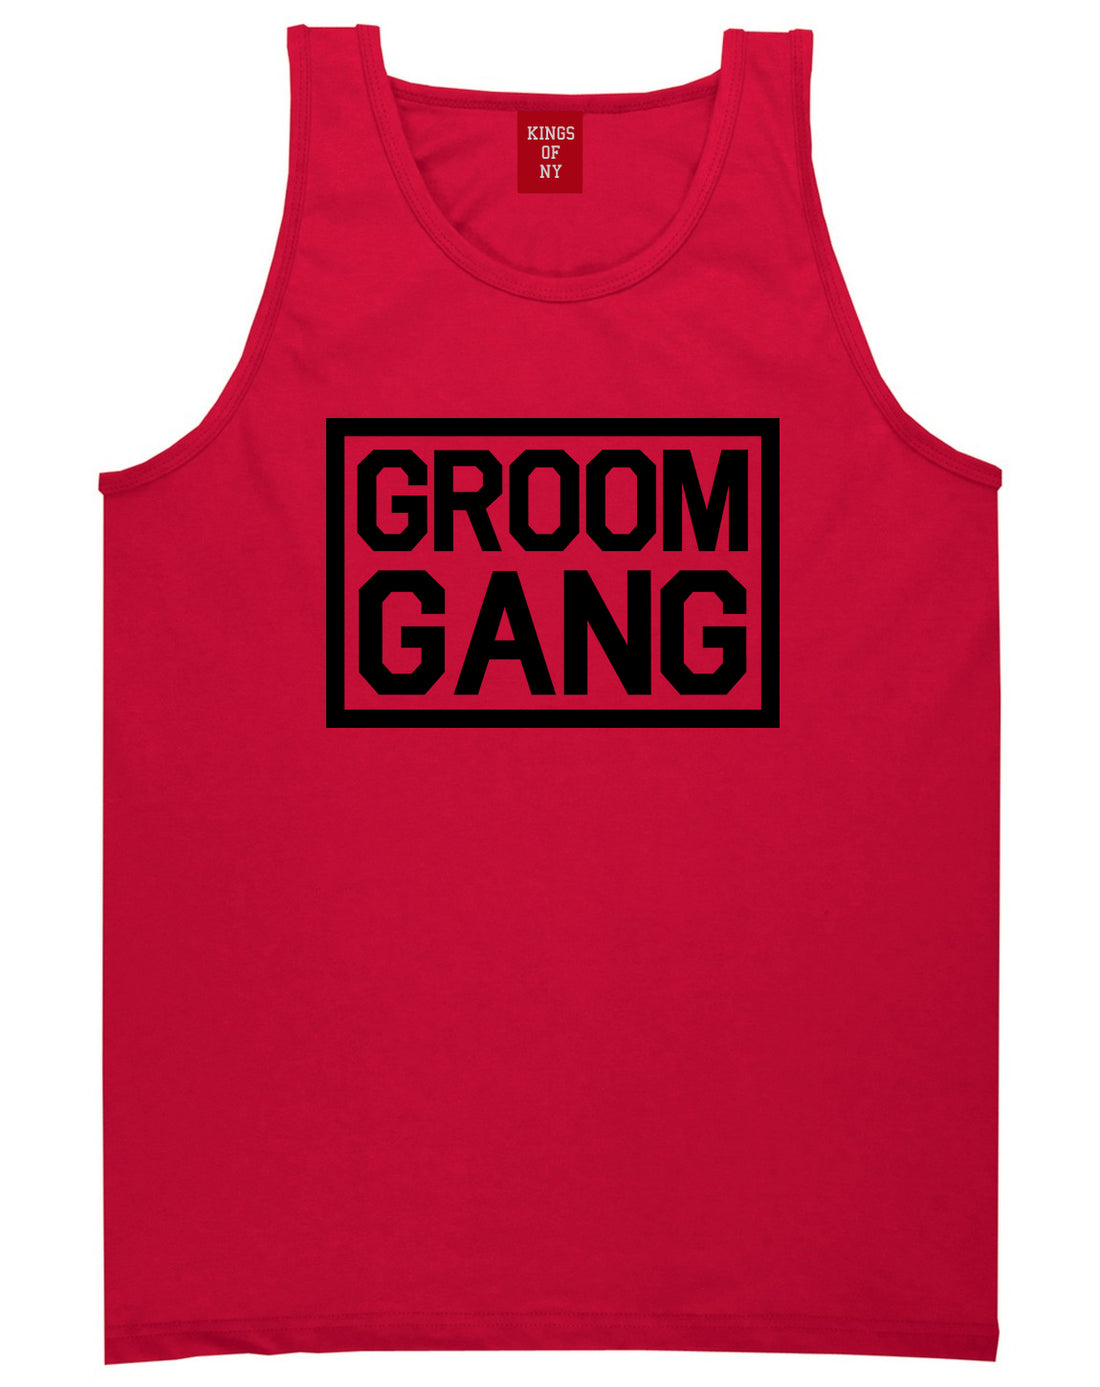 Groom Gang Bachelor Party Red Tank Top Shirt by Kings Of NY